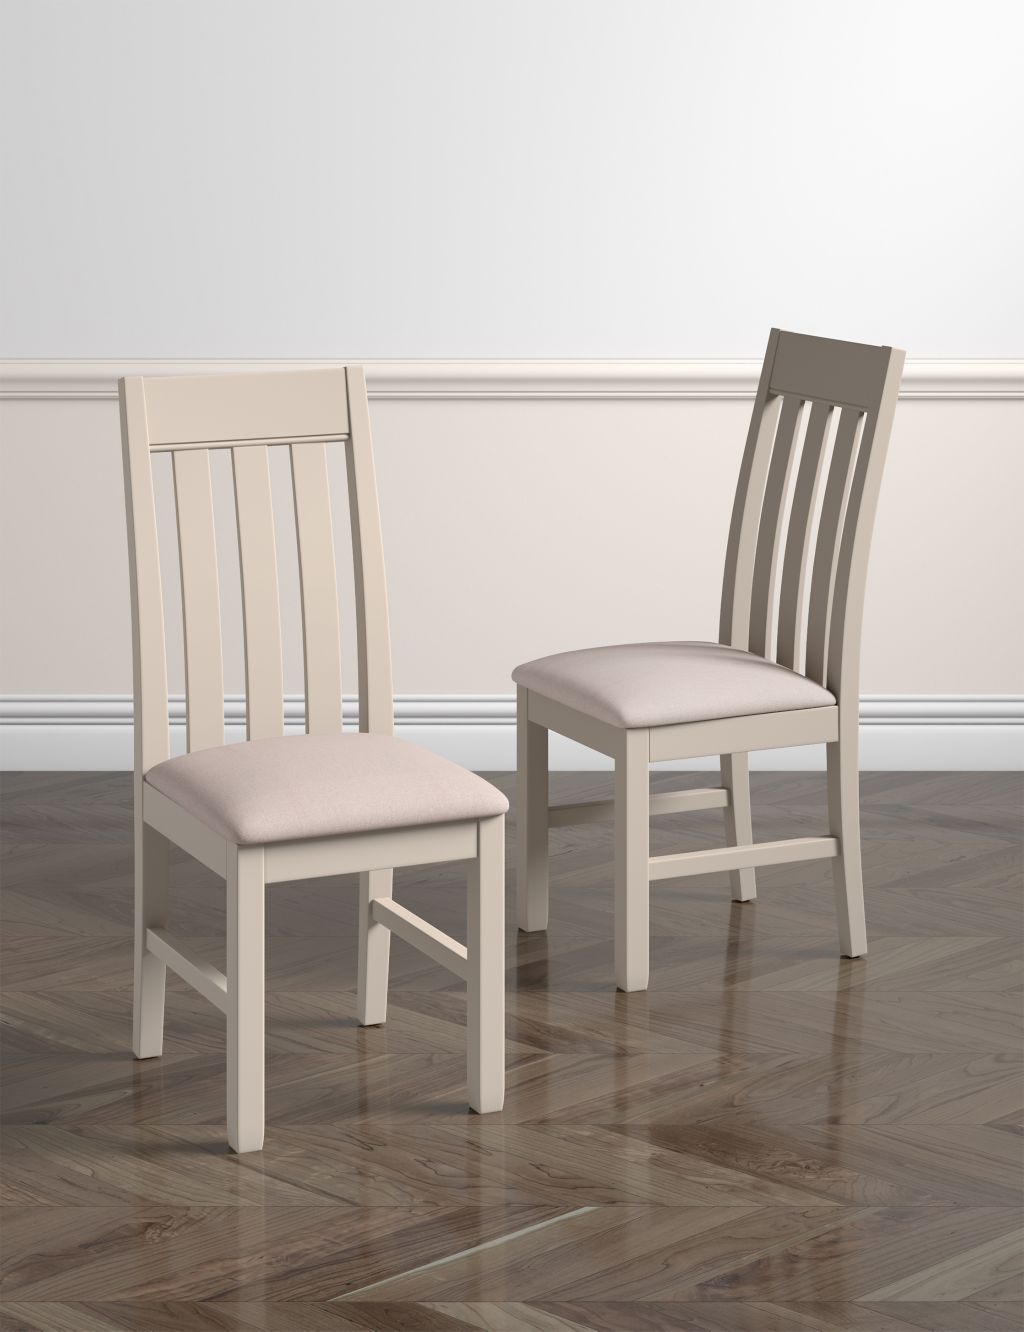 Set of 2 Padstow Putty Dining Chairs 1 of 10